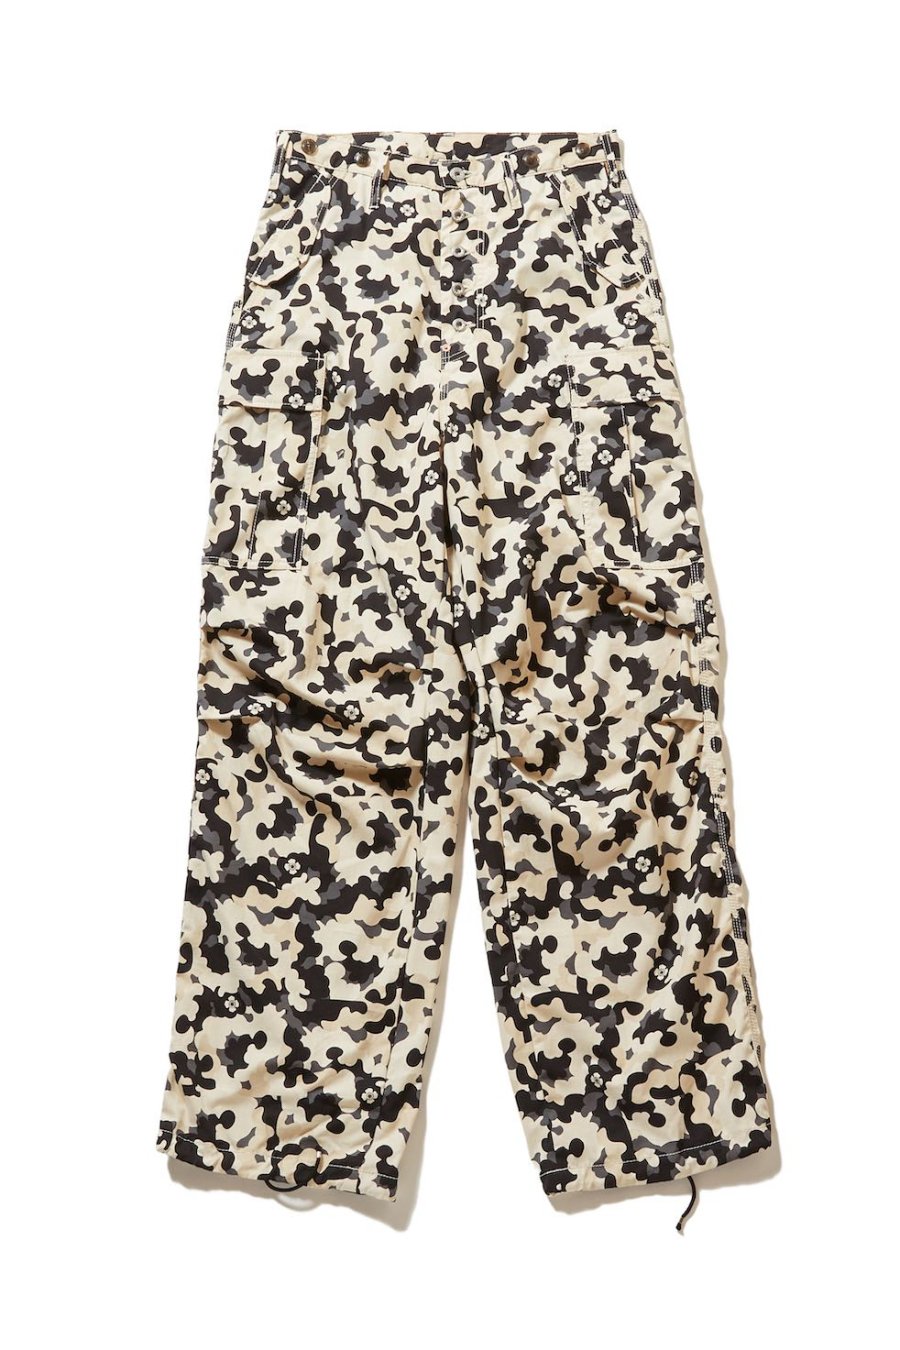 SUGARHILL  FLOWER CAMO CARGO TROUSERS(BEIGE CAMO)<img class='new_mark_img2' src='https://img.shop-pro.jp/img/new/icons15.gif' style='border:none;display:inline;margin:0px;padding:0px;width:auto;' />